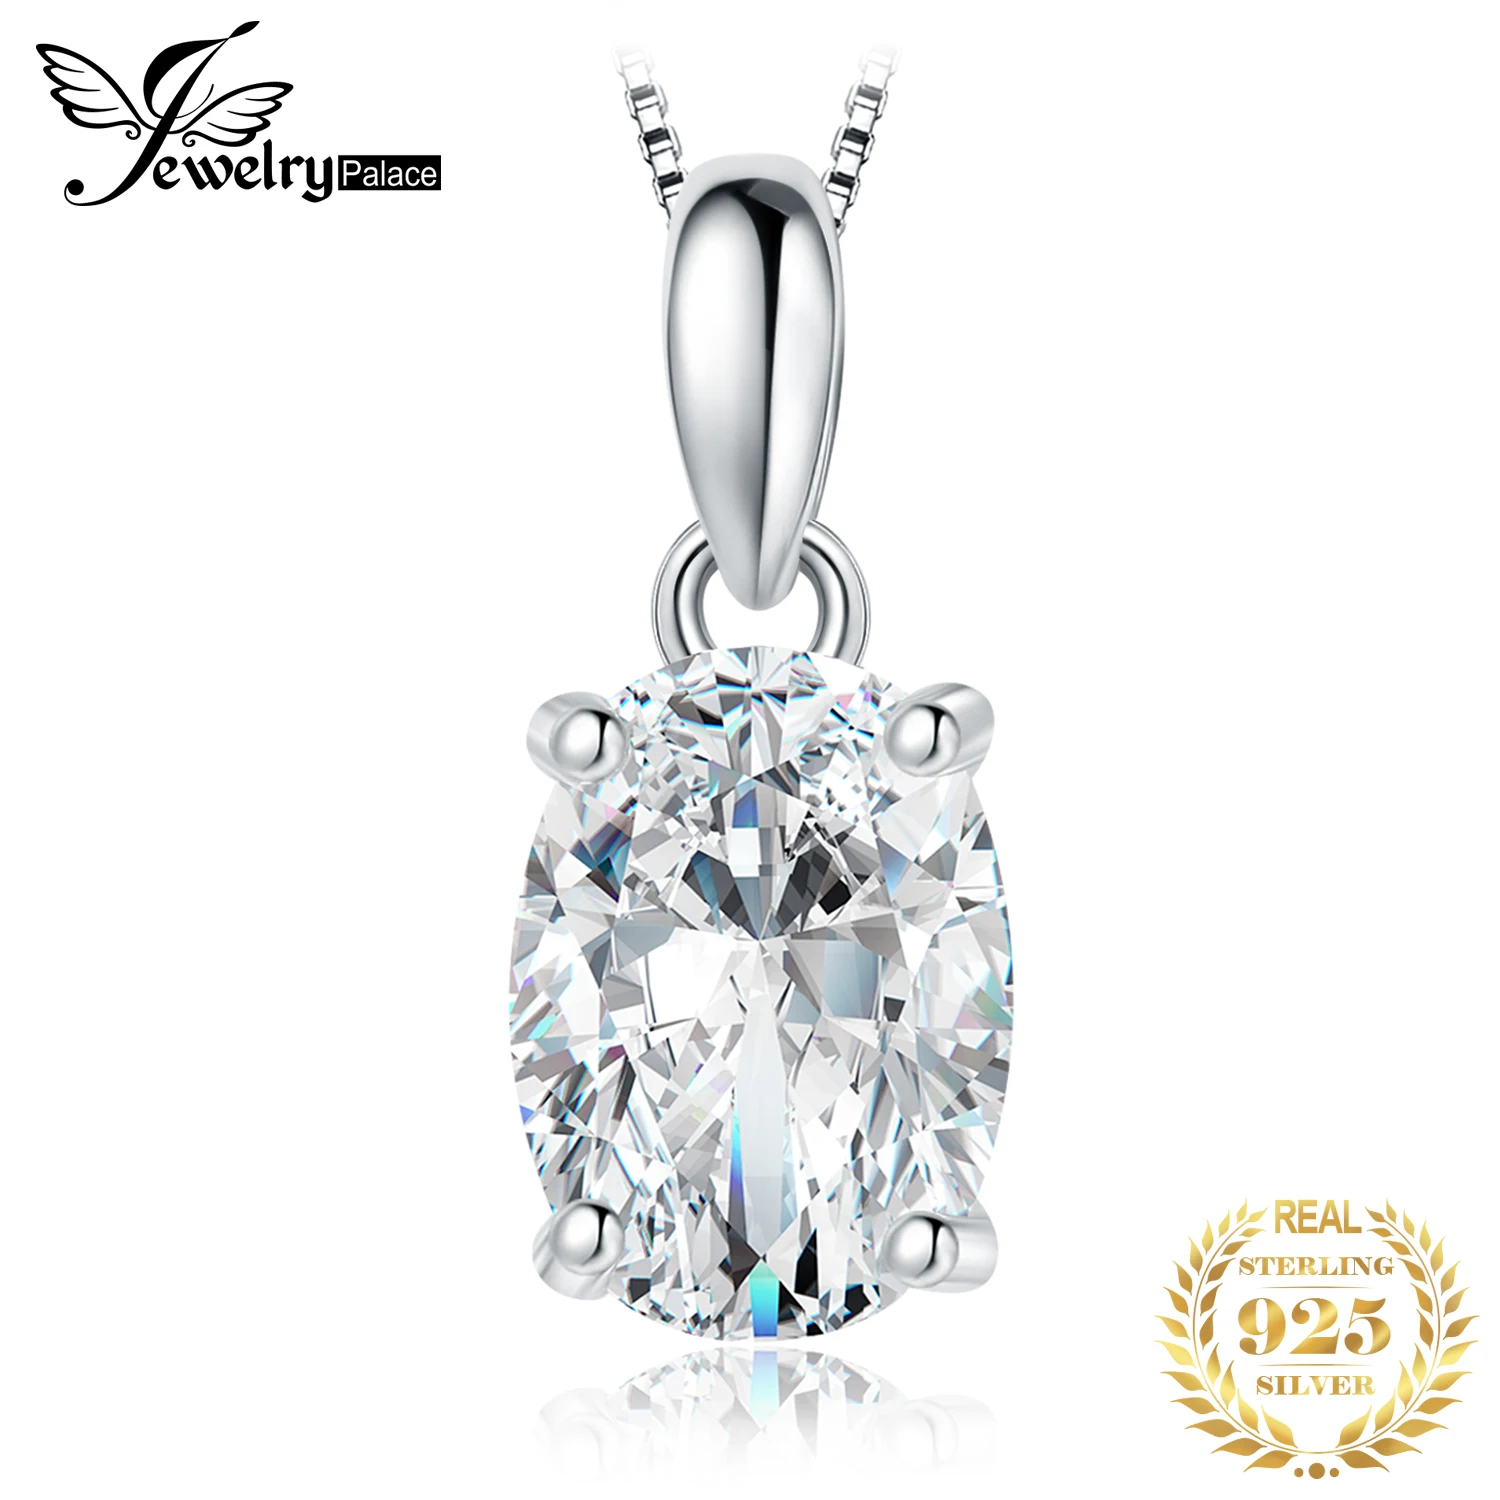 

JewelryPalace New GRA 1ct 2ct Oval Moissanite S925 Sterling Silver Solitaire Pendant Necklace for Woman Wedding Gift No Chain